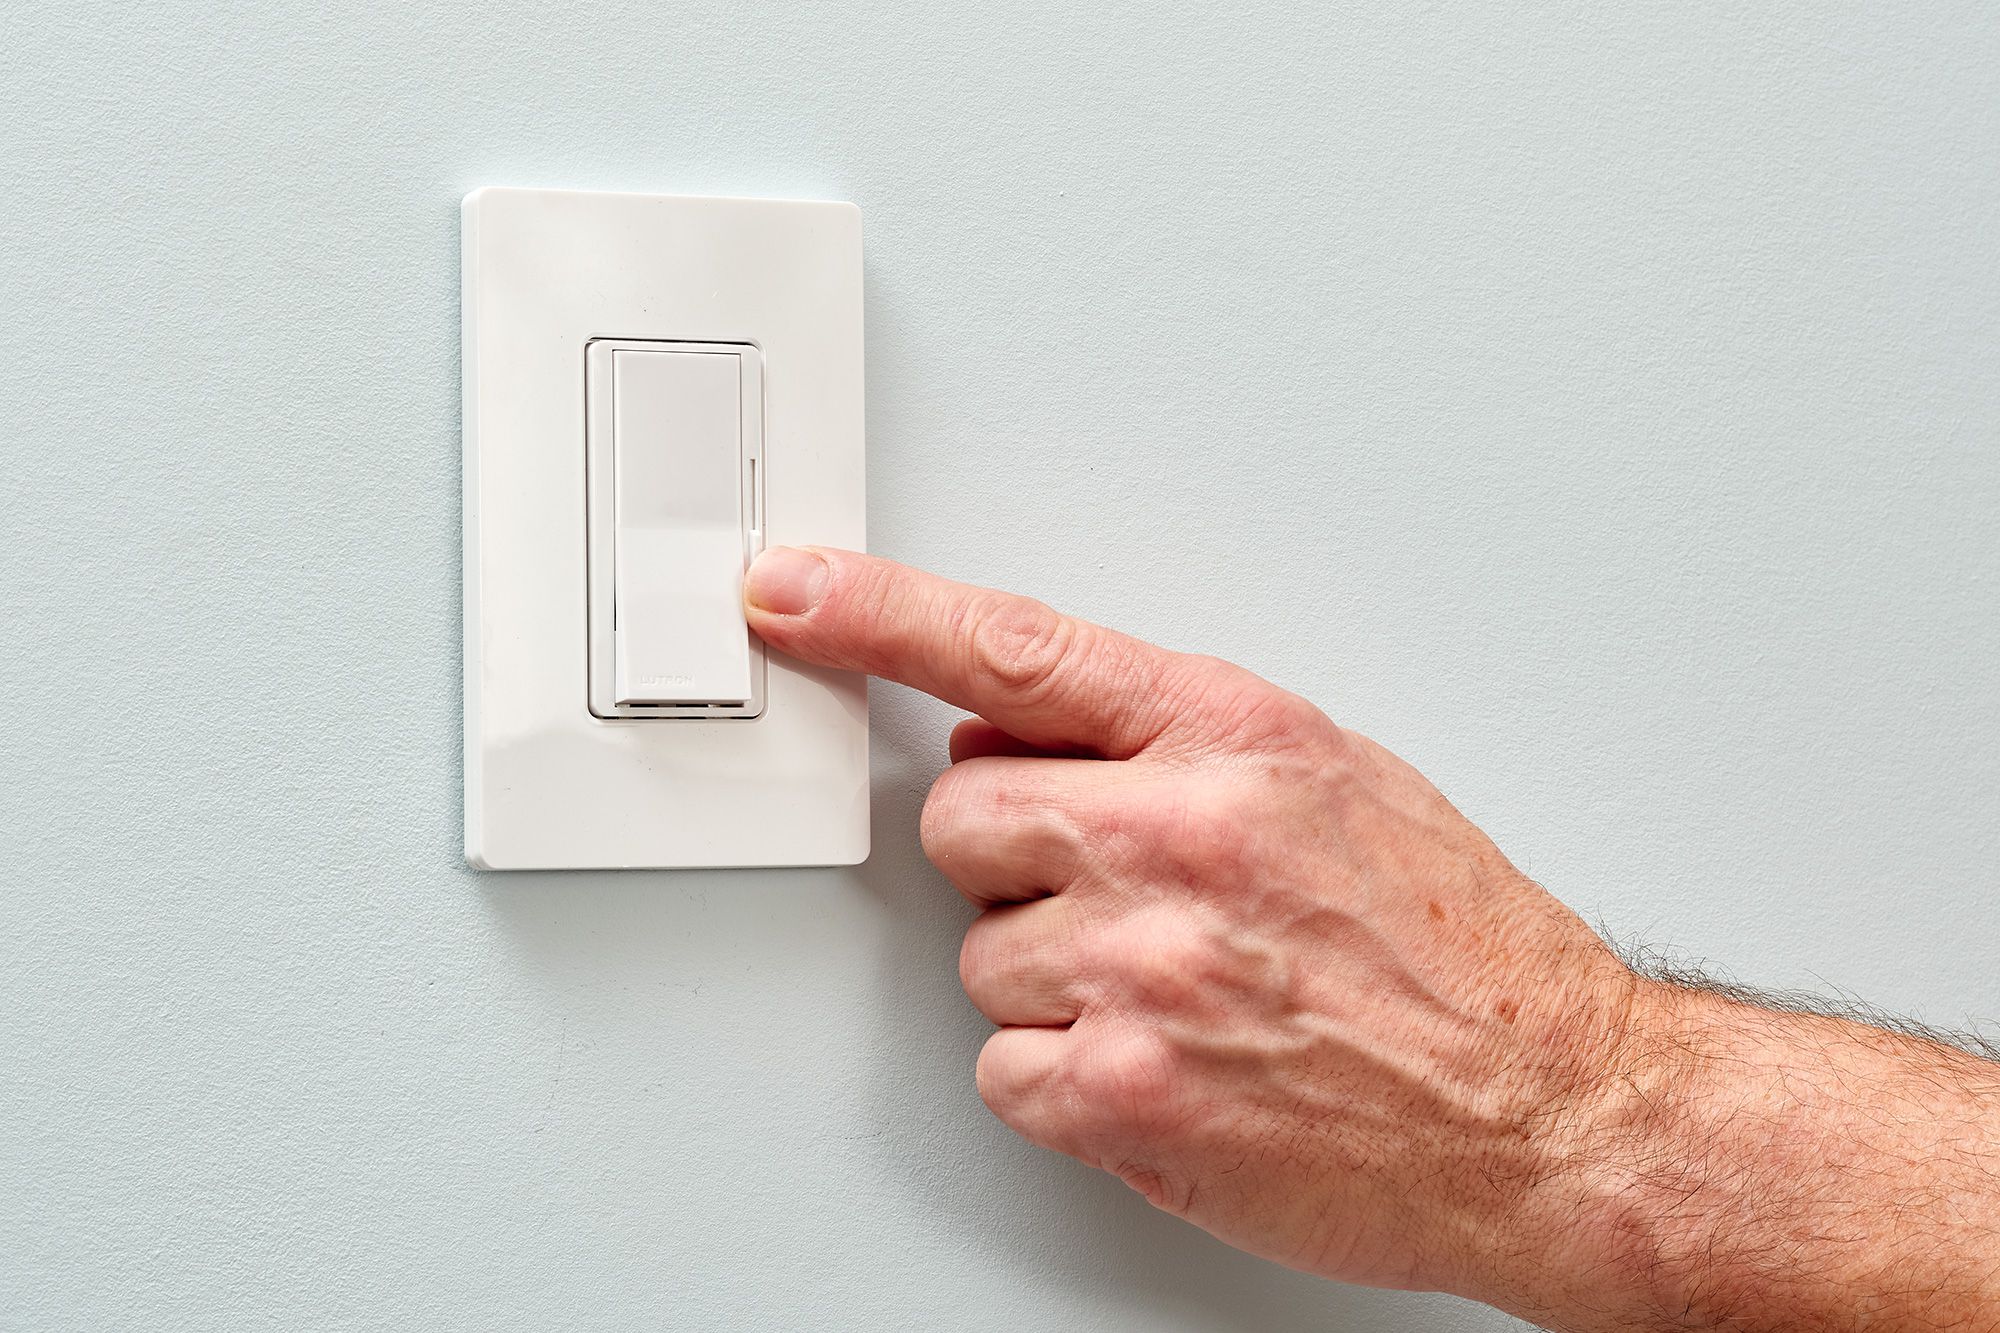 How to Fix a Buzzing Dimmer Switch